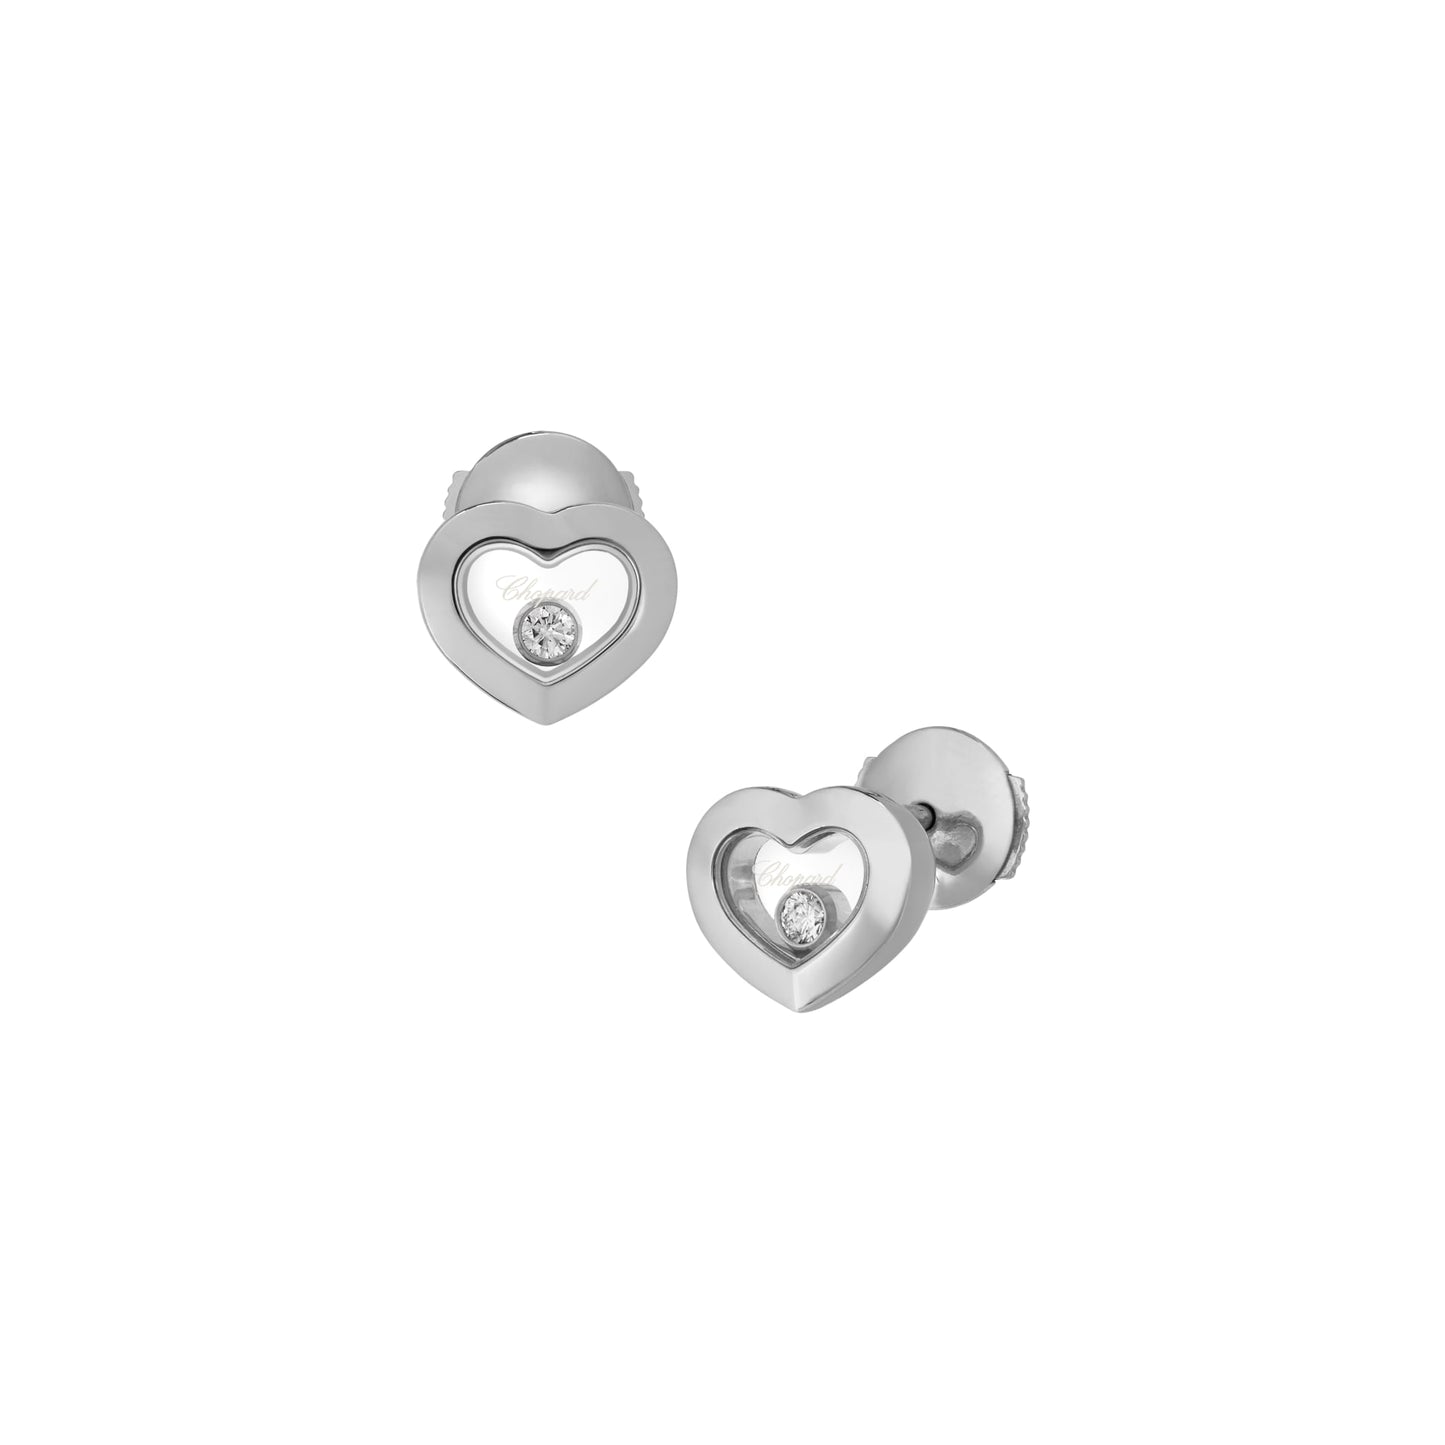 HAPPY DIAMONDS ICONS EARRINGS, ETHICAL WHITE GOLD, DIAMONDS 83A054-1001